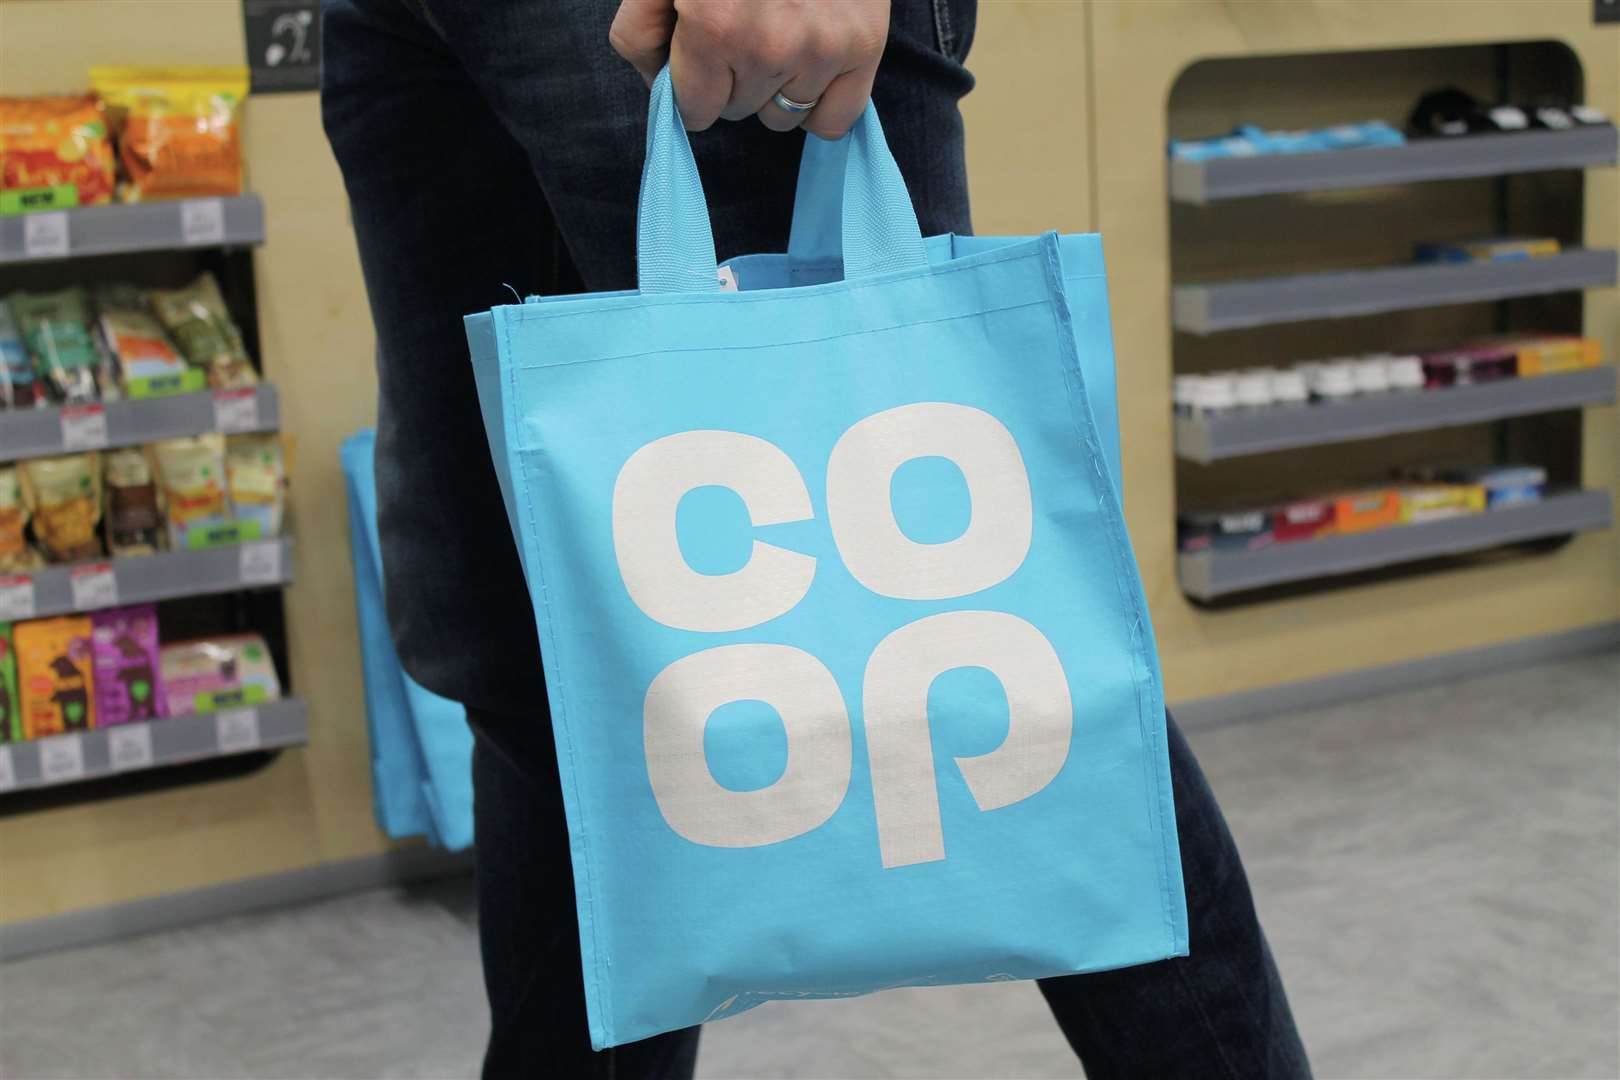 The Co-op has said it will take its time before making a decision on handing back rates relief cash (Co-op/PA)